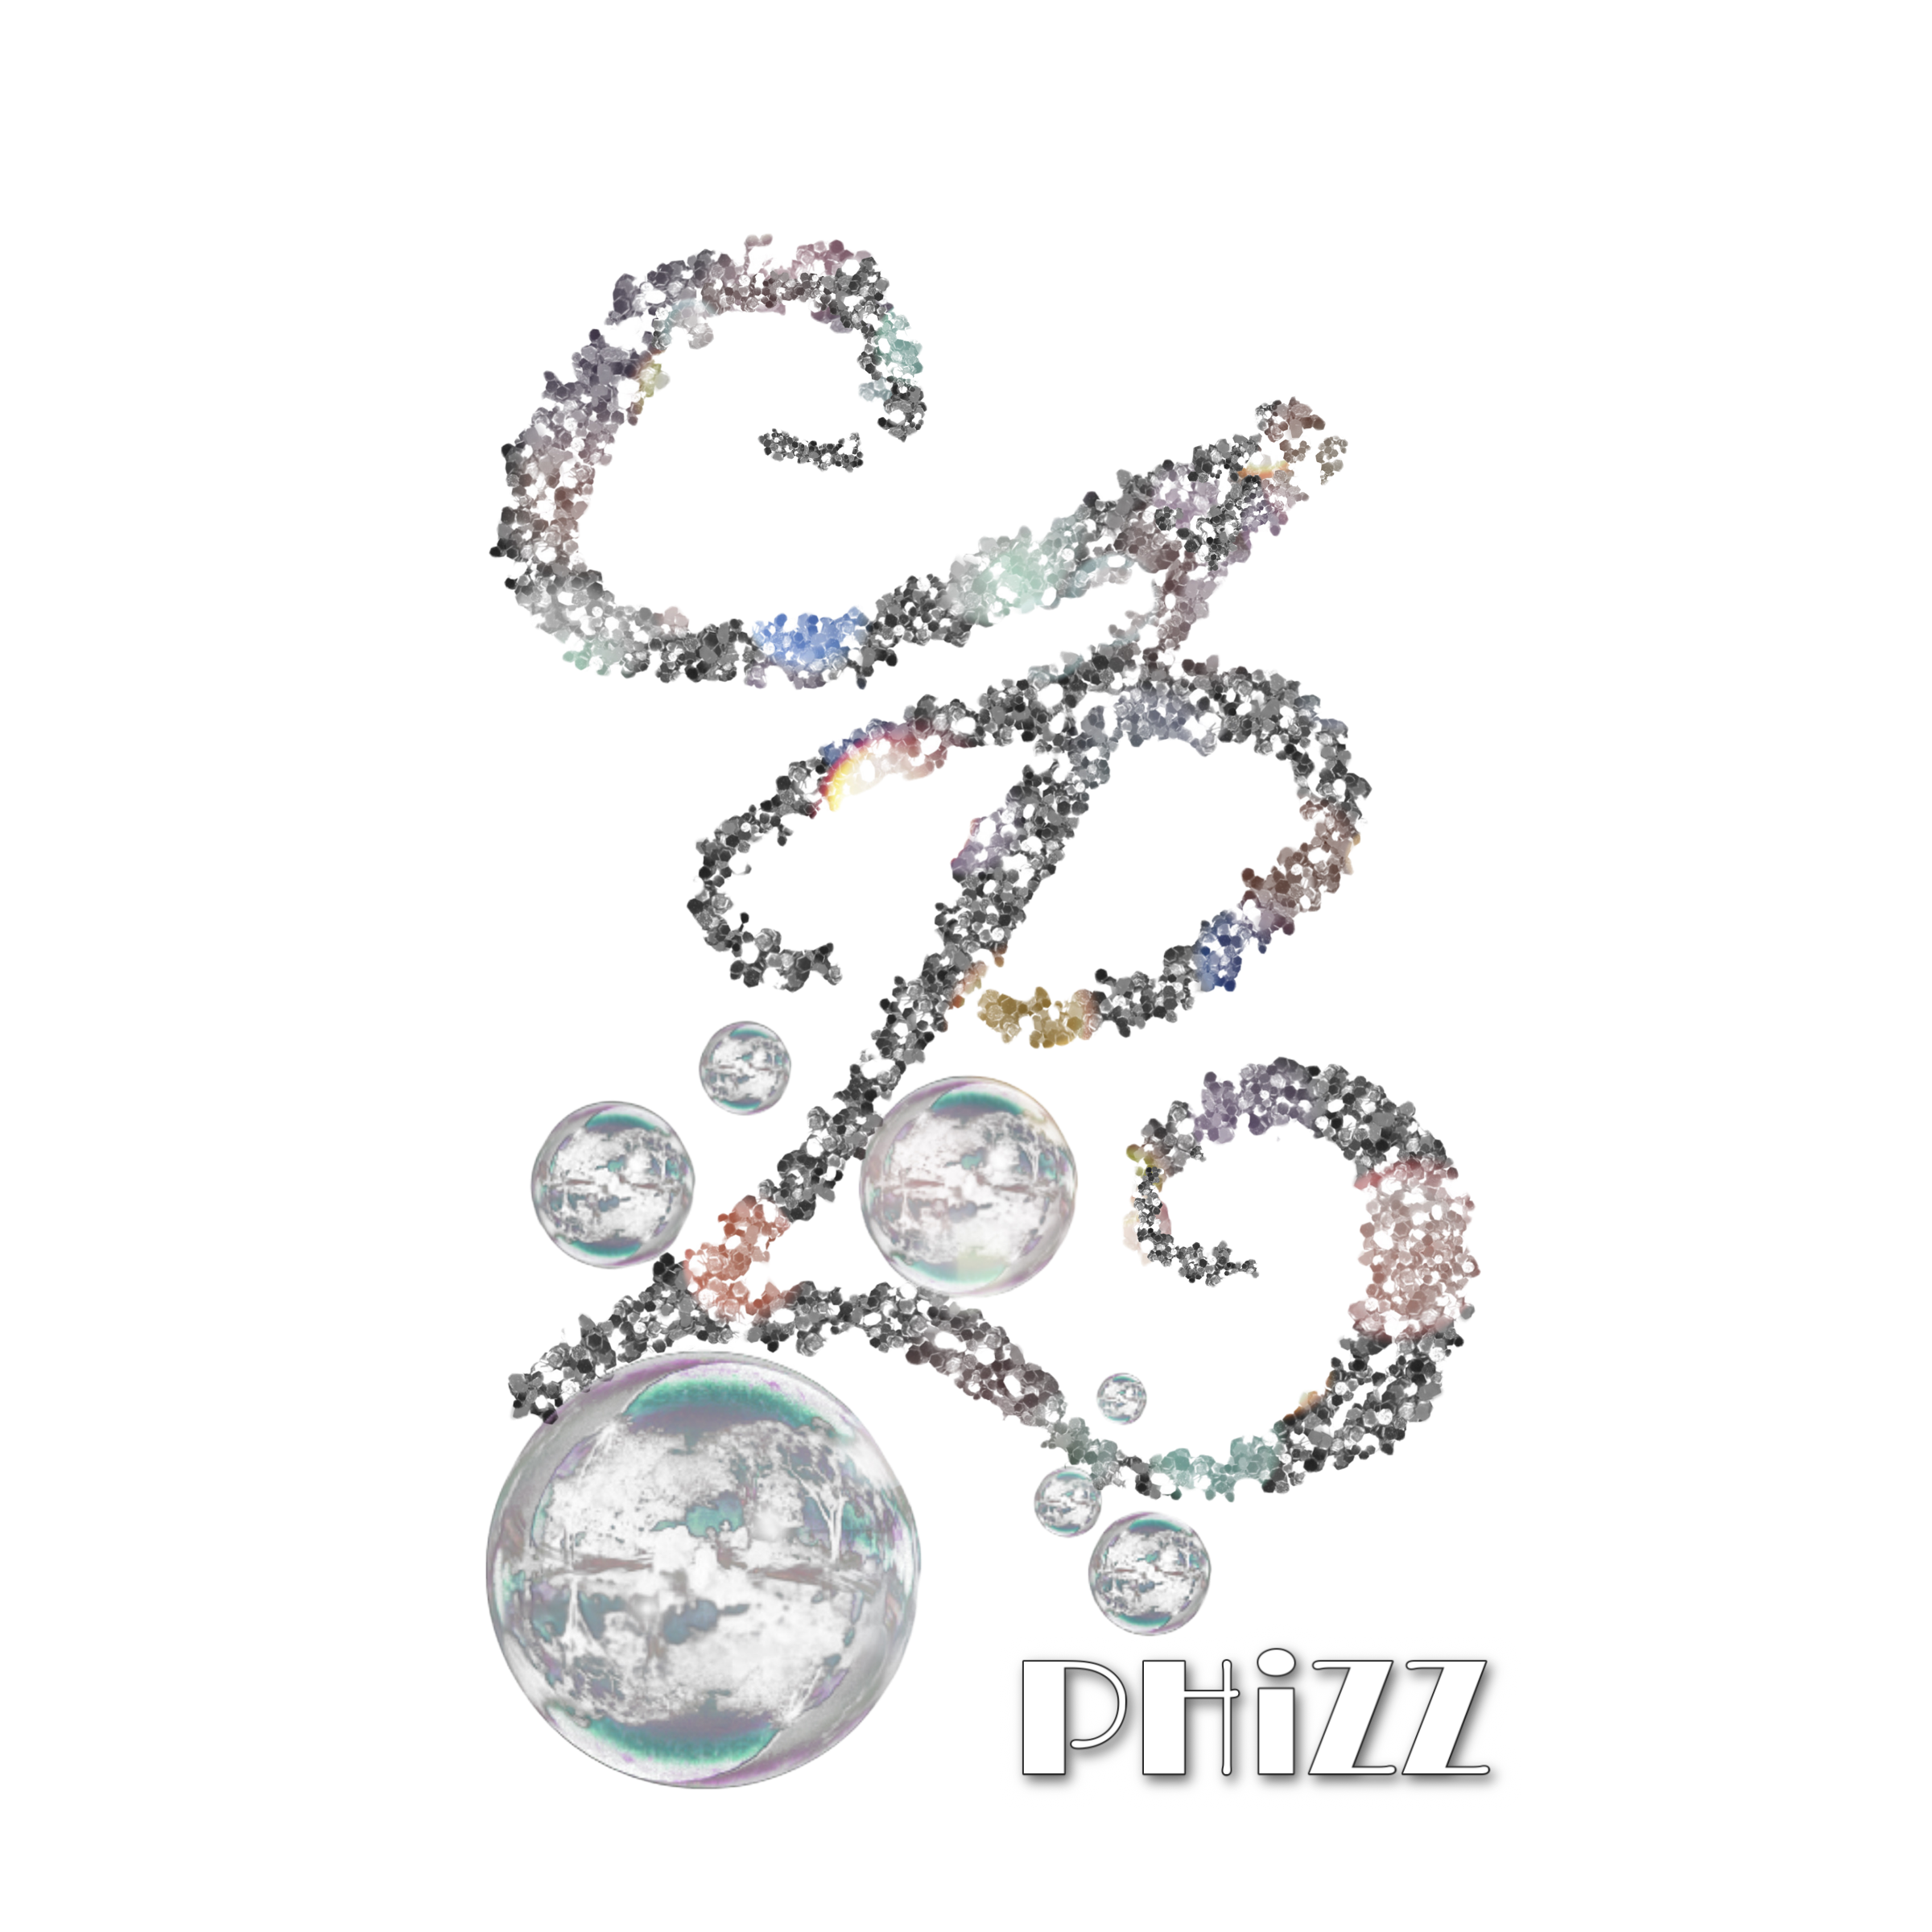 PHiZZ official site